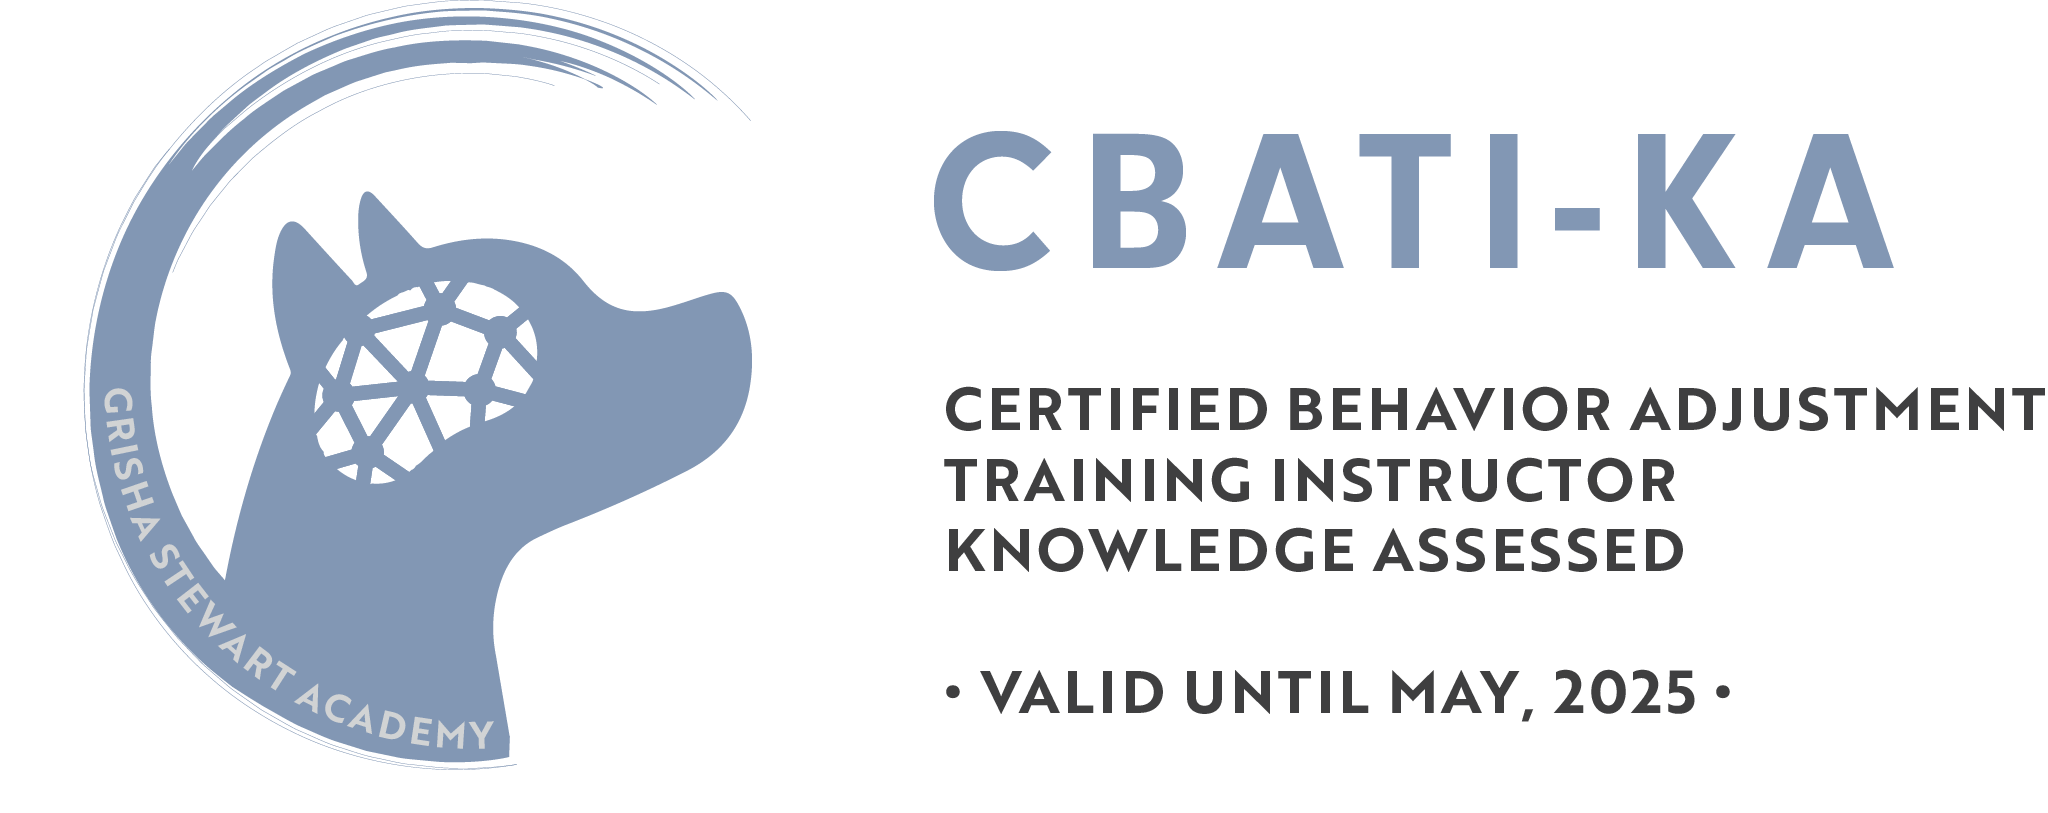 CBATI-KA logo; a dog silhouette with an abstract image of a brain inside the dog's head, and the text "Certified Behaviour Adjustment Training Instructor - Knowledge Assessed."